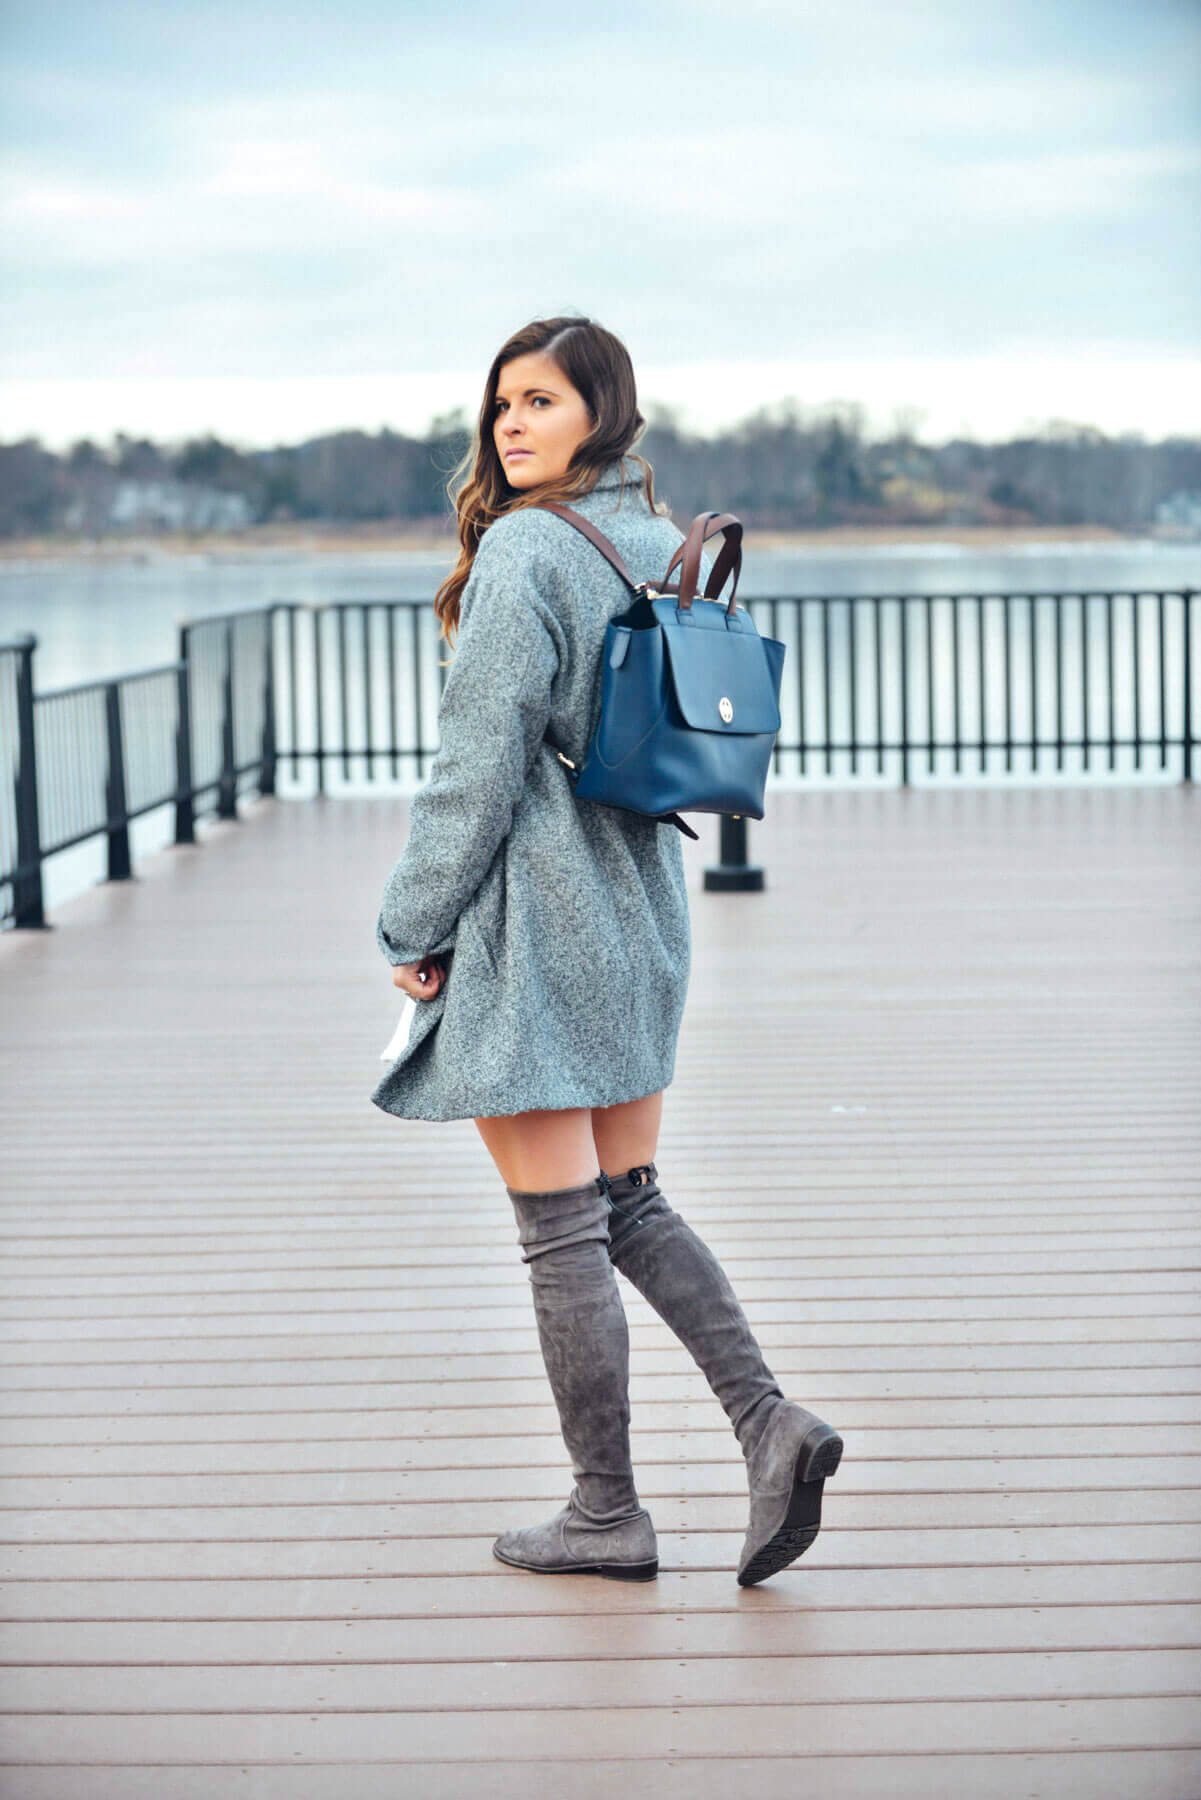 Navy Bag, Grey Coat, JEMMA Poppins Navy Bag, Winter Outfit, Tilden of To Be Bright